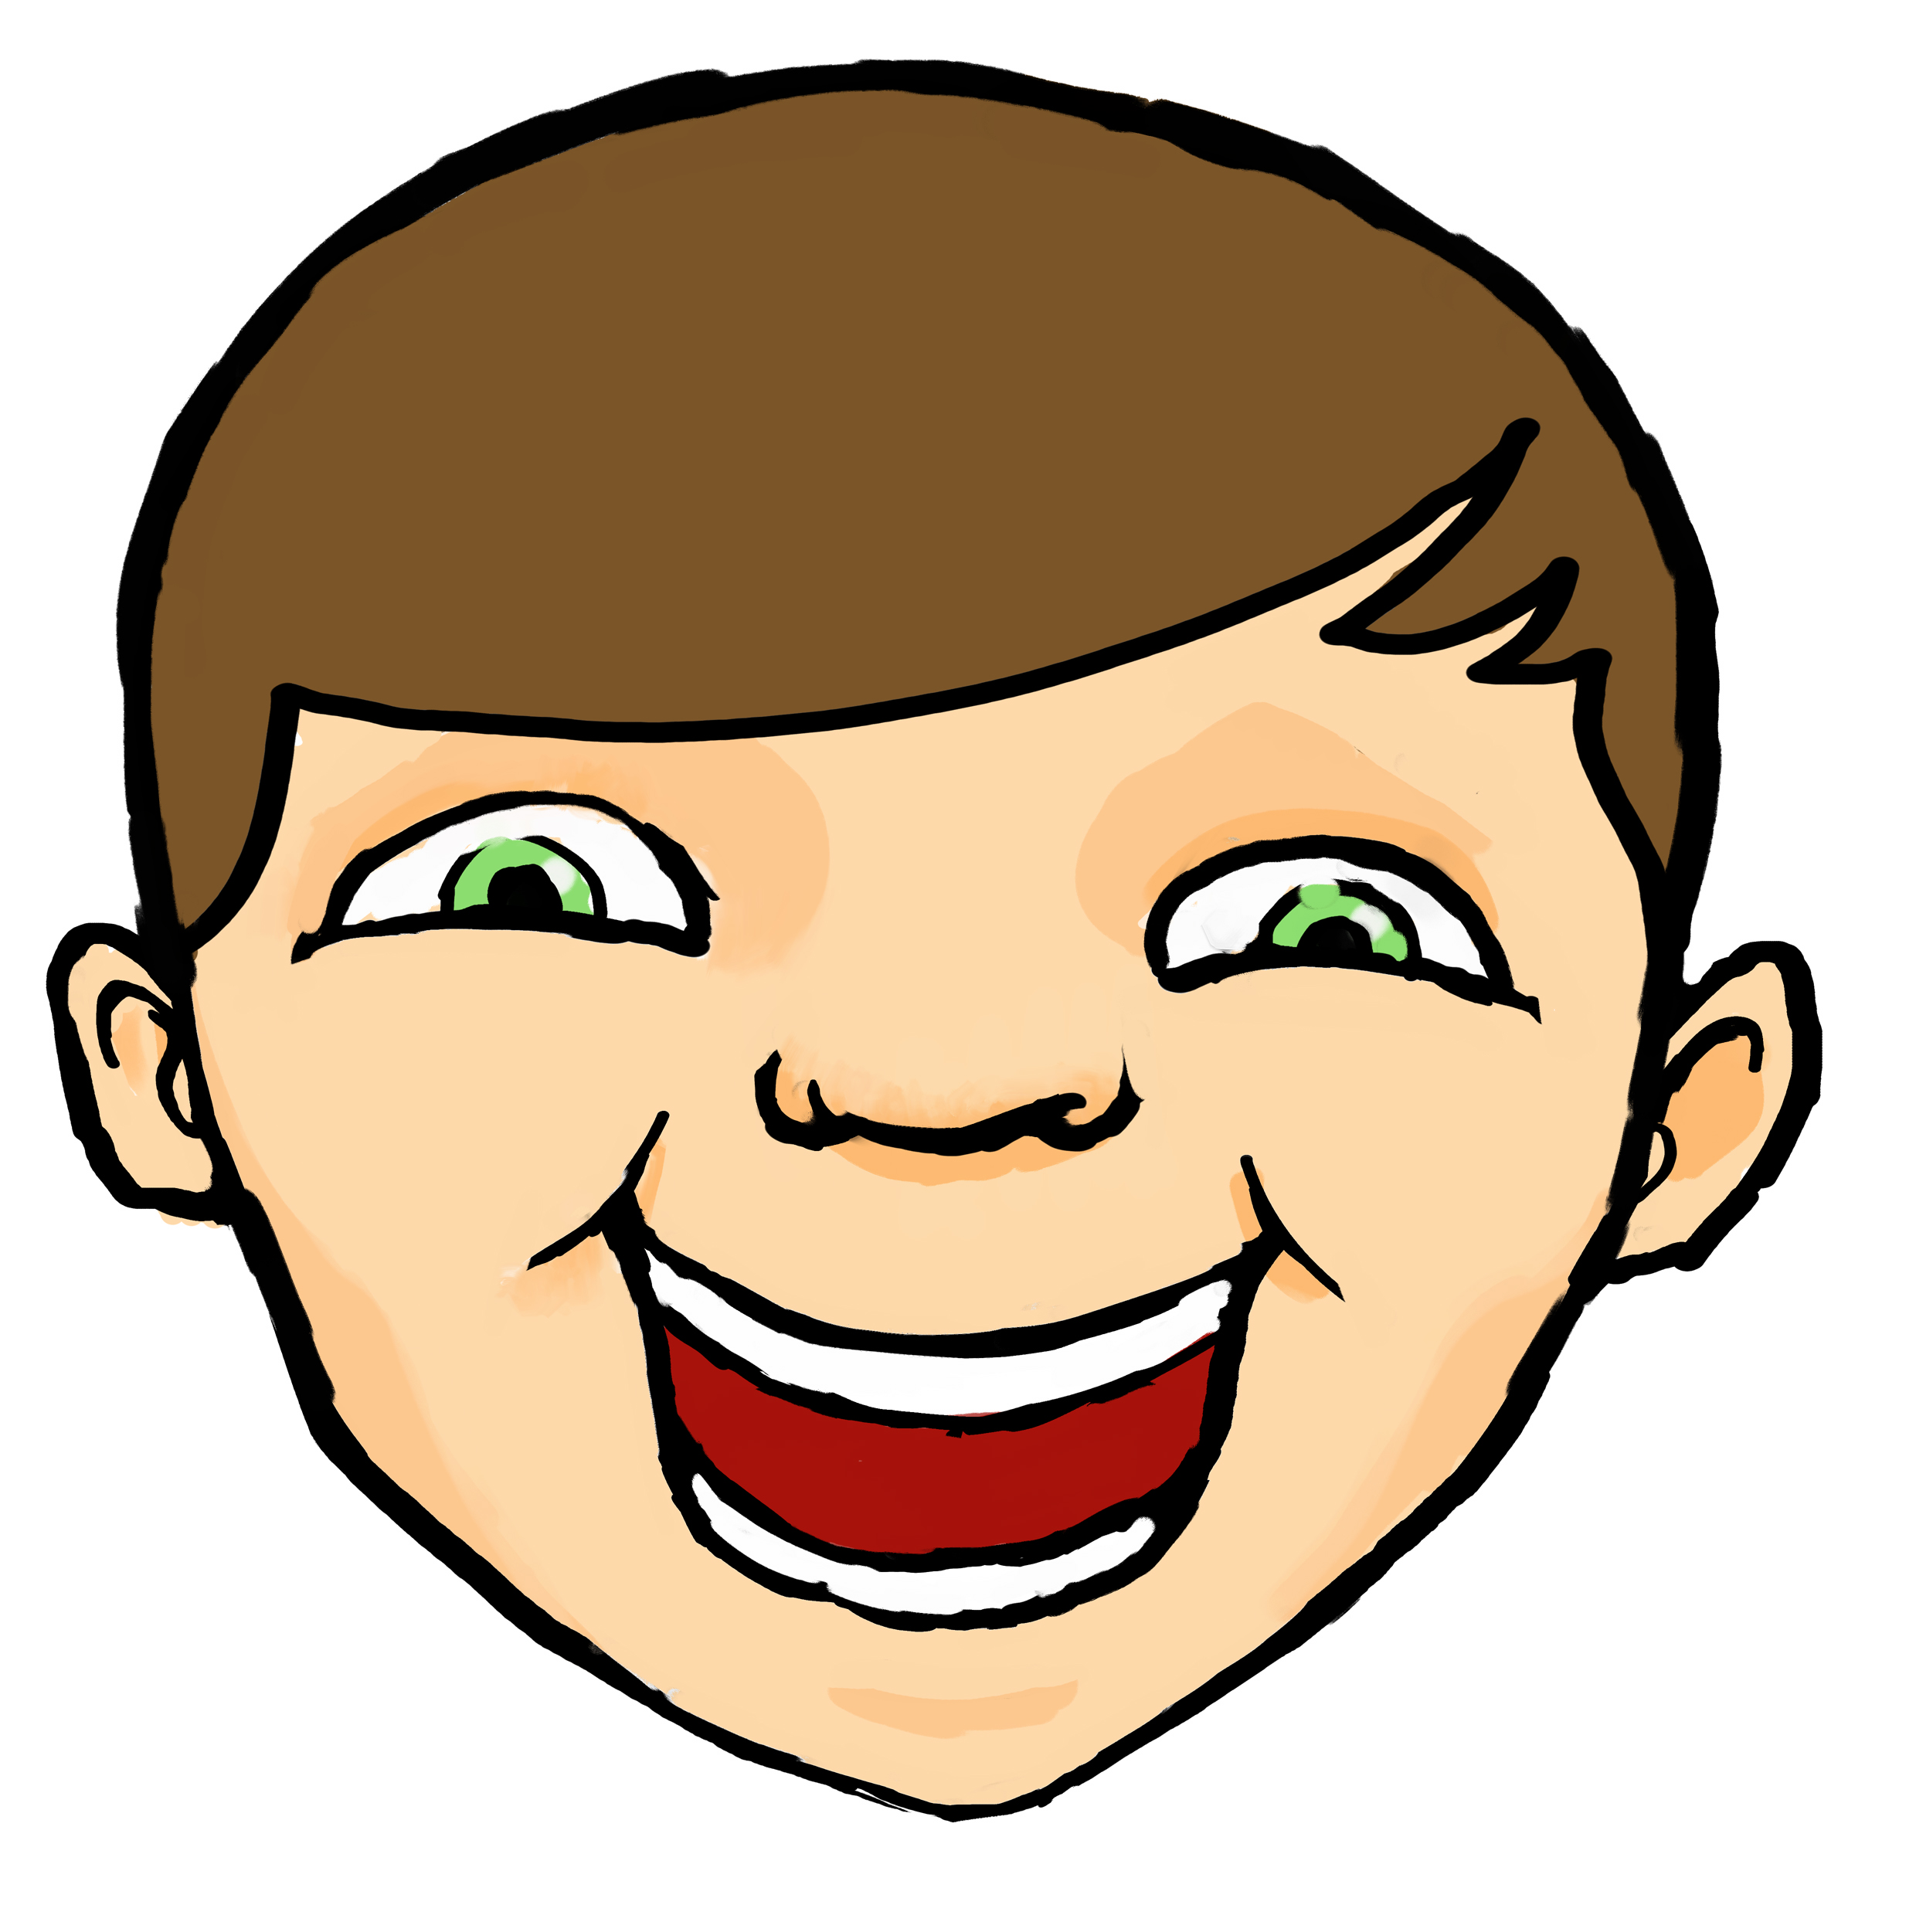 Animated Laughter Clip Art | Clipart Panda - Free Clipart Images